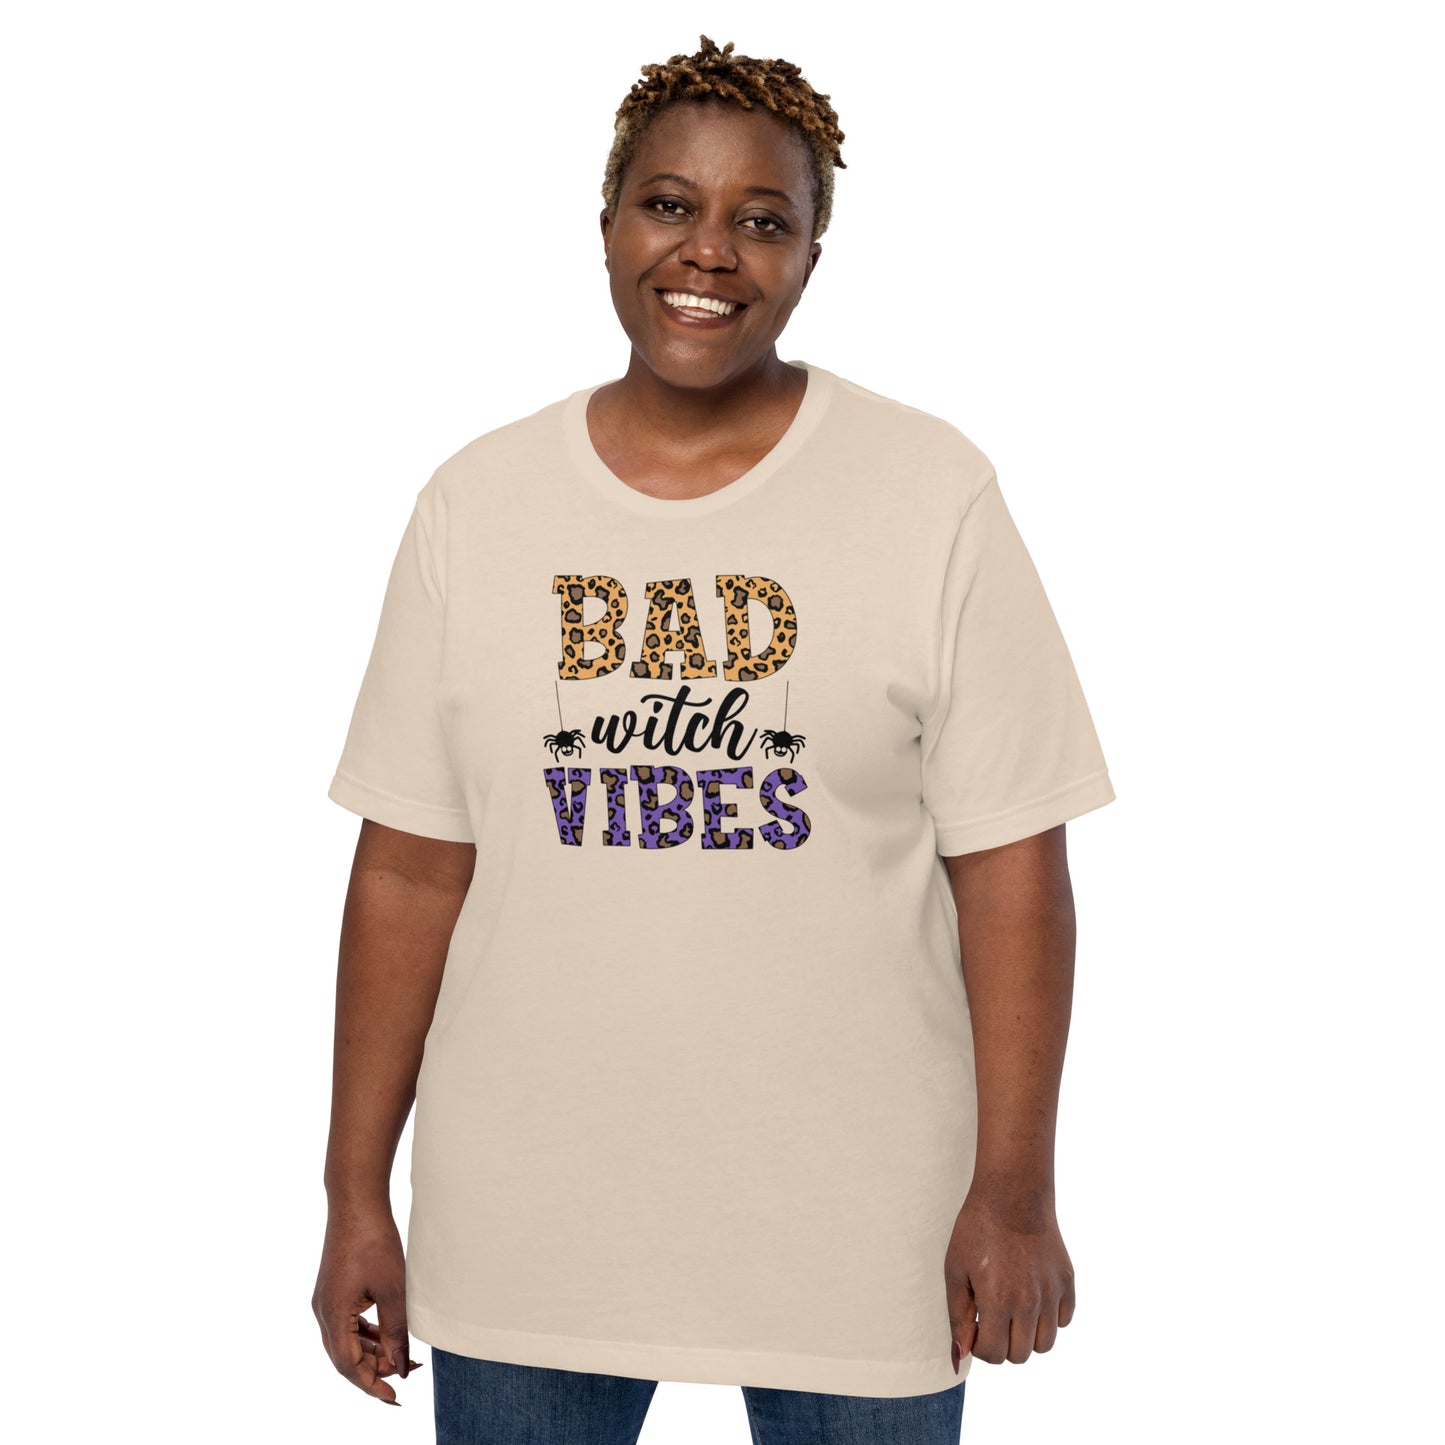 Bad Witch Vibes Unisex t-shirt